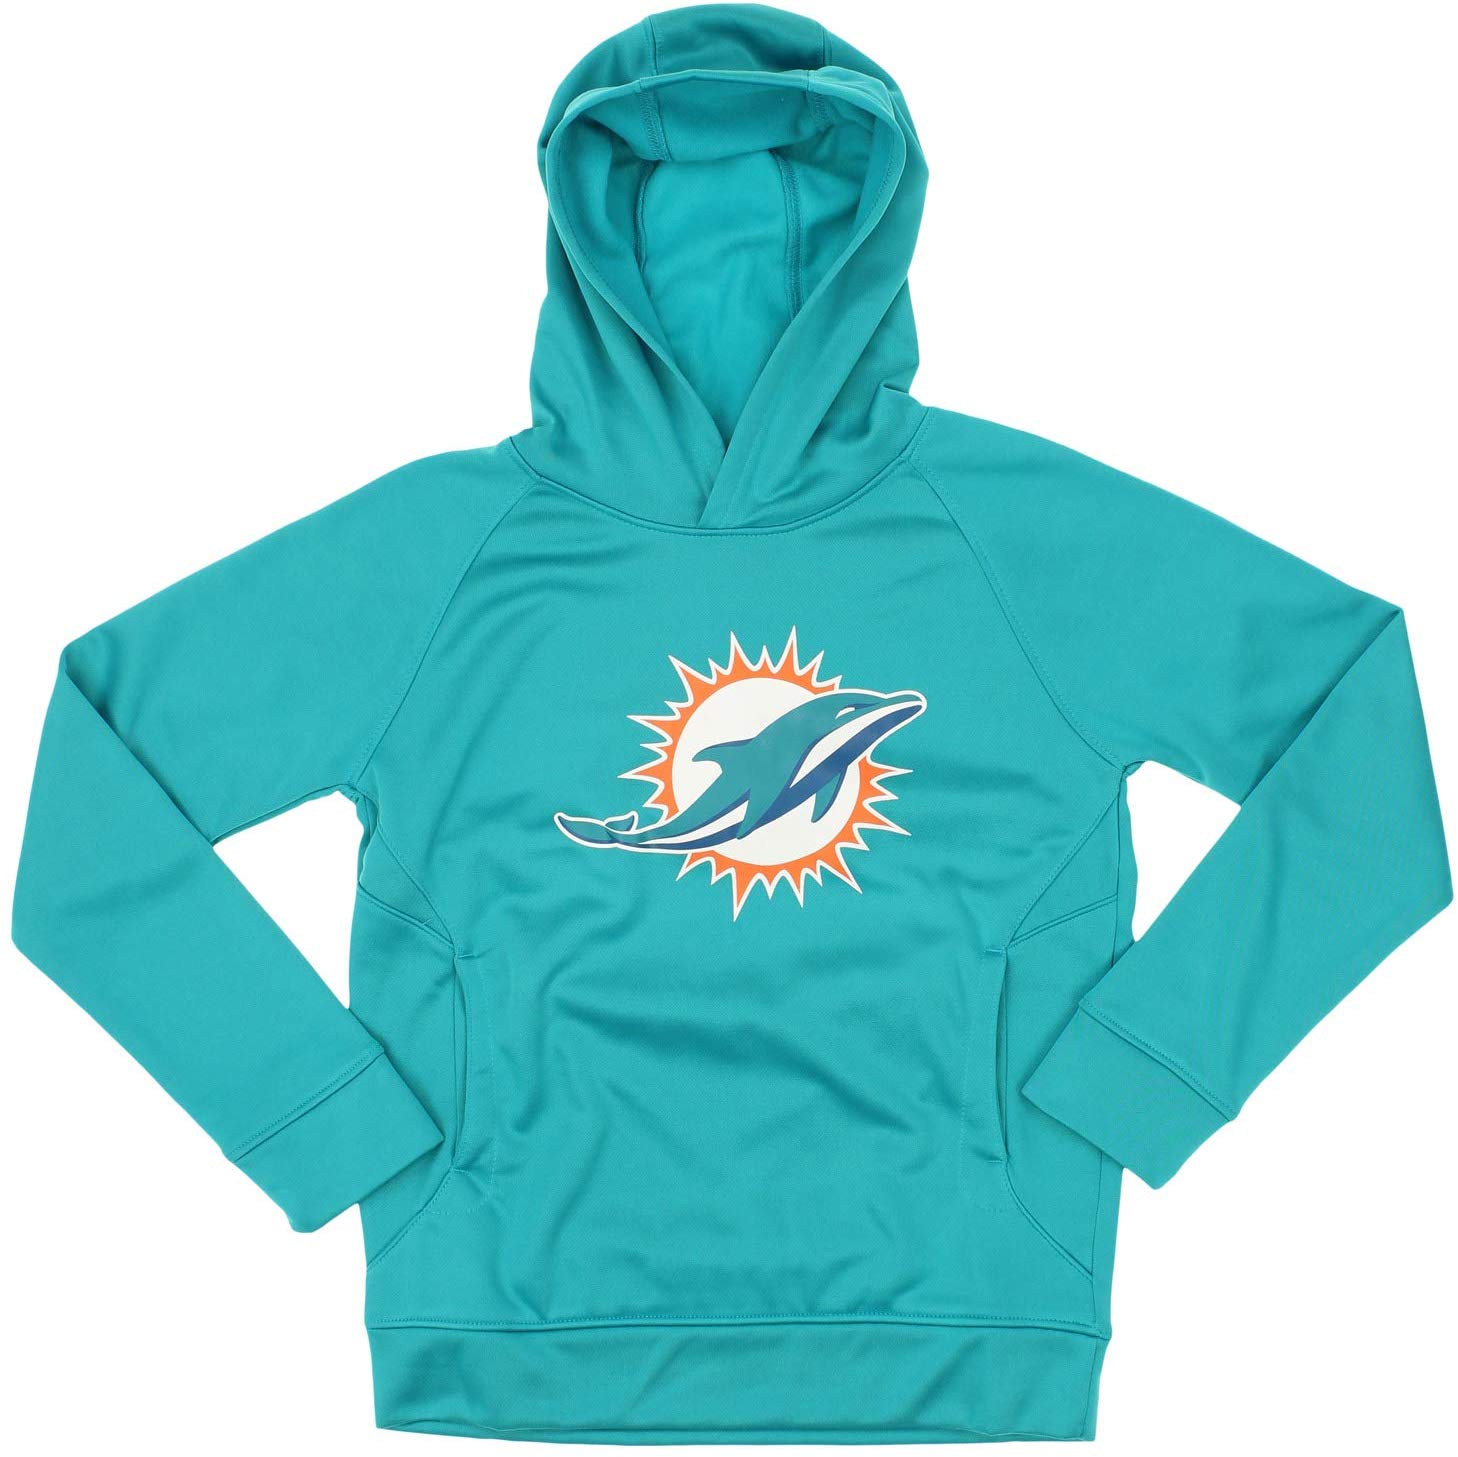 OuterStuff NFL Youth Miami Dolphins Team Performance Hoodie and Tee ...